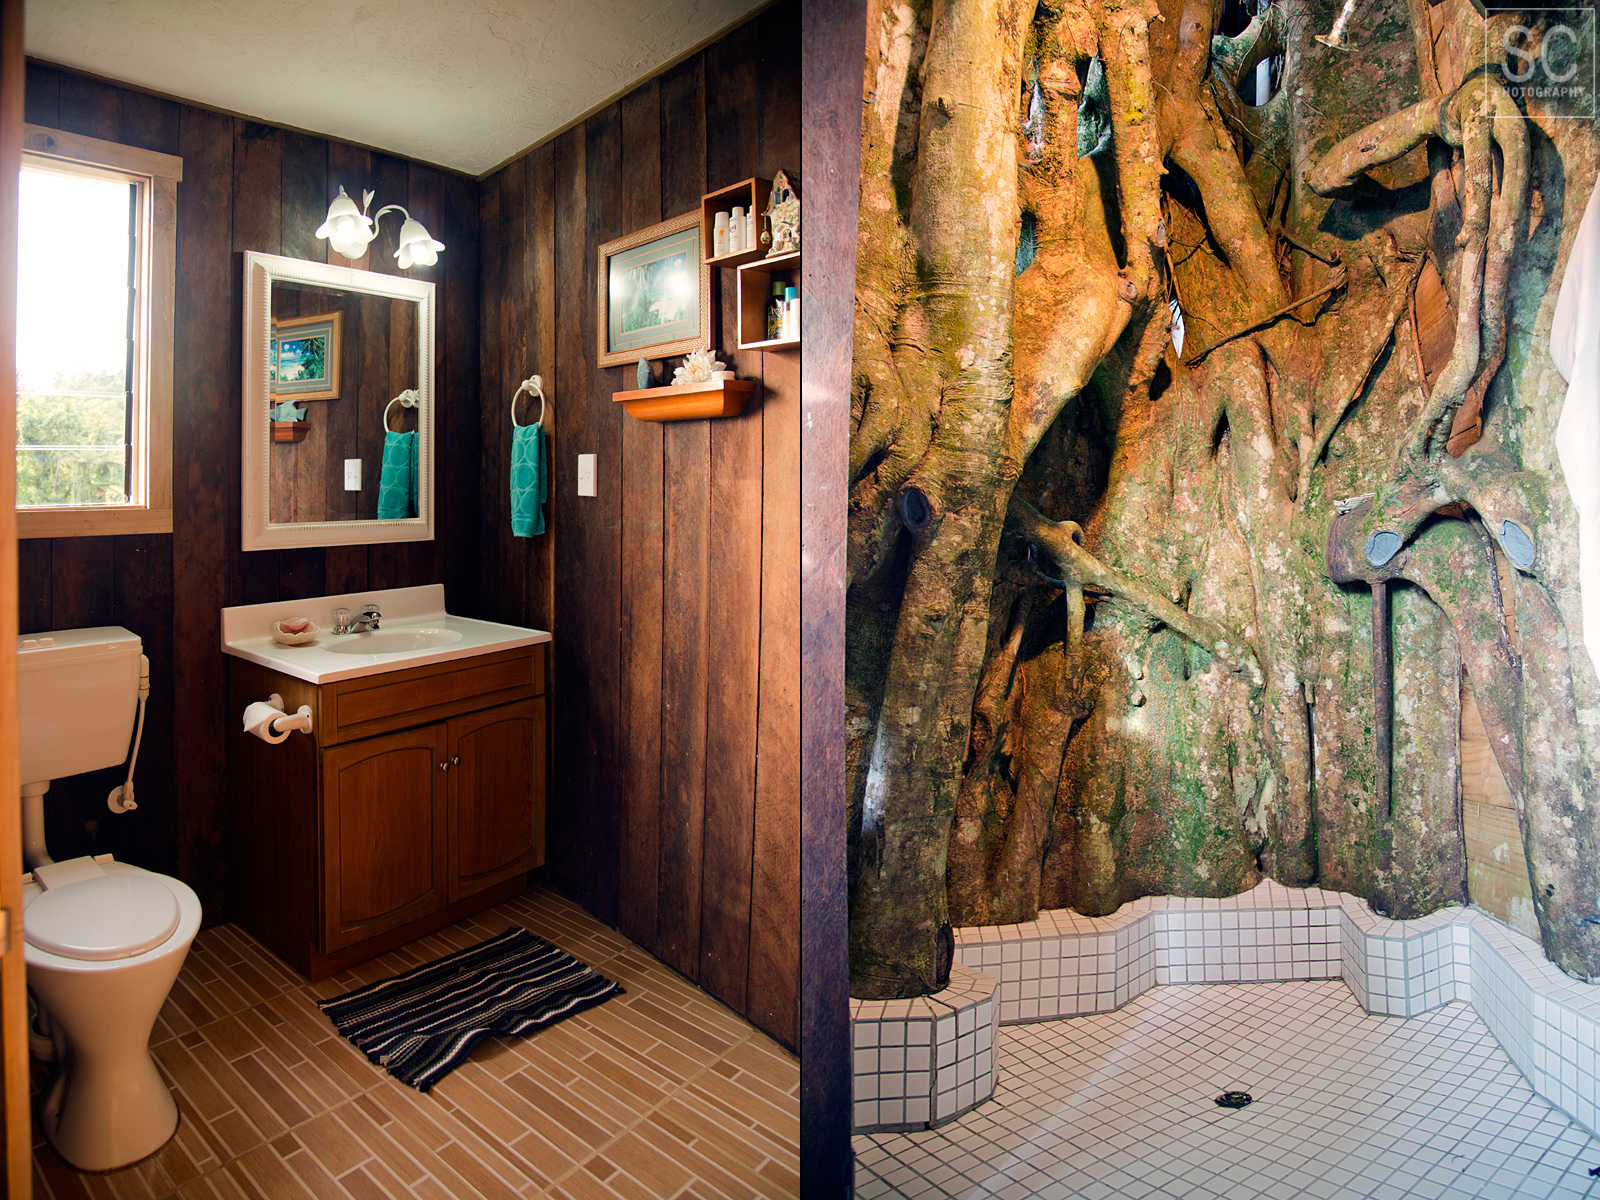 Bathroom in the treehouse, Lupe Sina Treesort